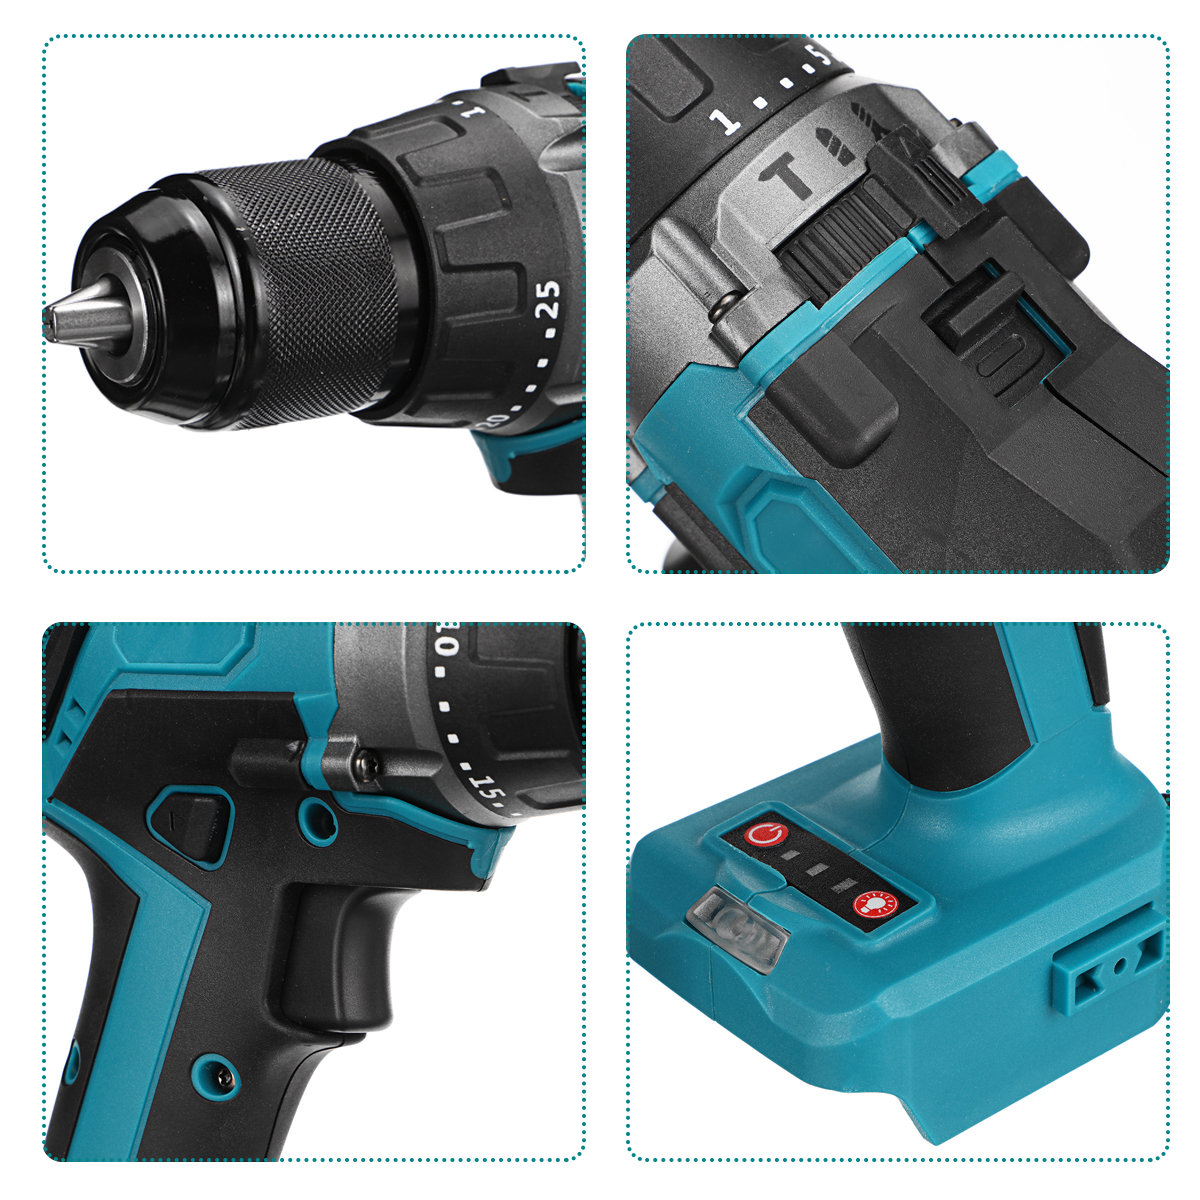 3-IN-1-Brushless-Electric-Hammer-Drill-Screwdriver-13mm-253-Torque-Cordless-Impact-Drill-For-Makita--1861682-4